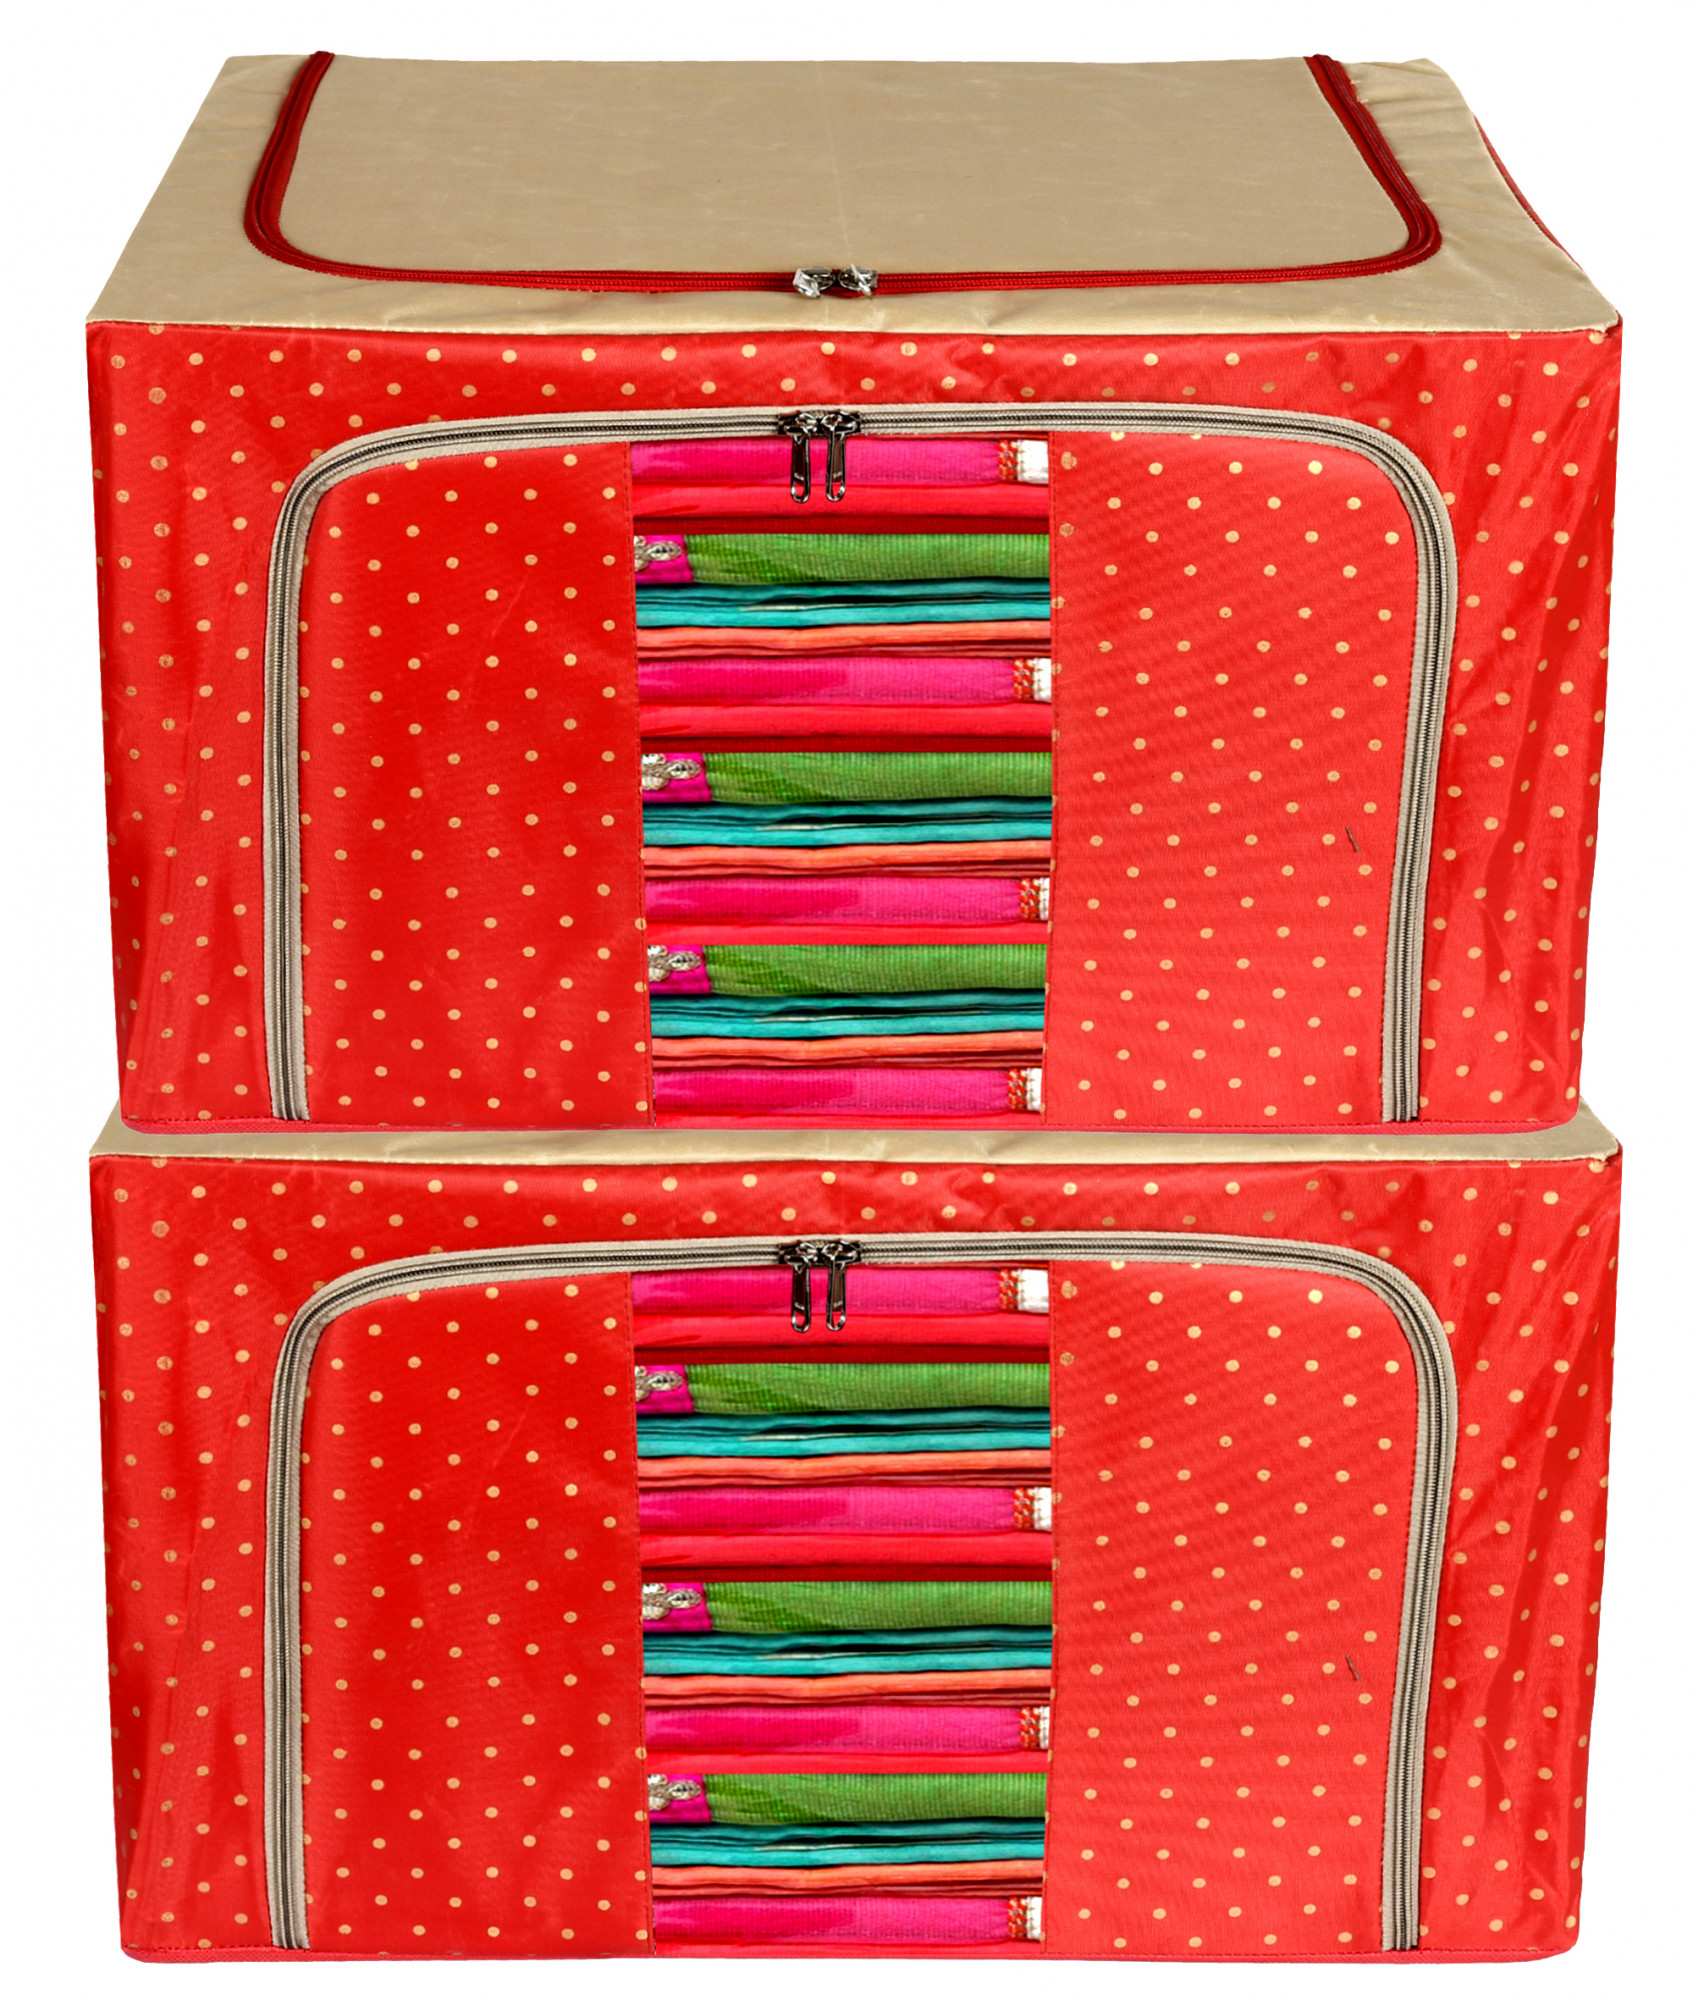 Kuber Industries Dot Printed Steel Frame Storage Box/Organizer For Clothing, Blankets, Bedding With Clear Window, 44Ltr. (Red & Brown)-44KM0229